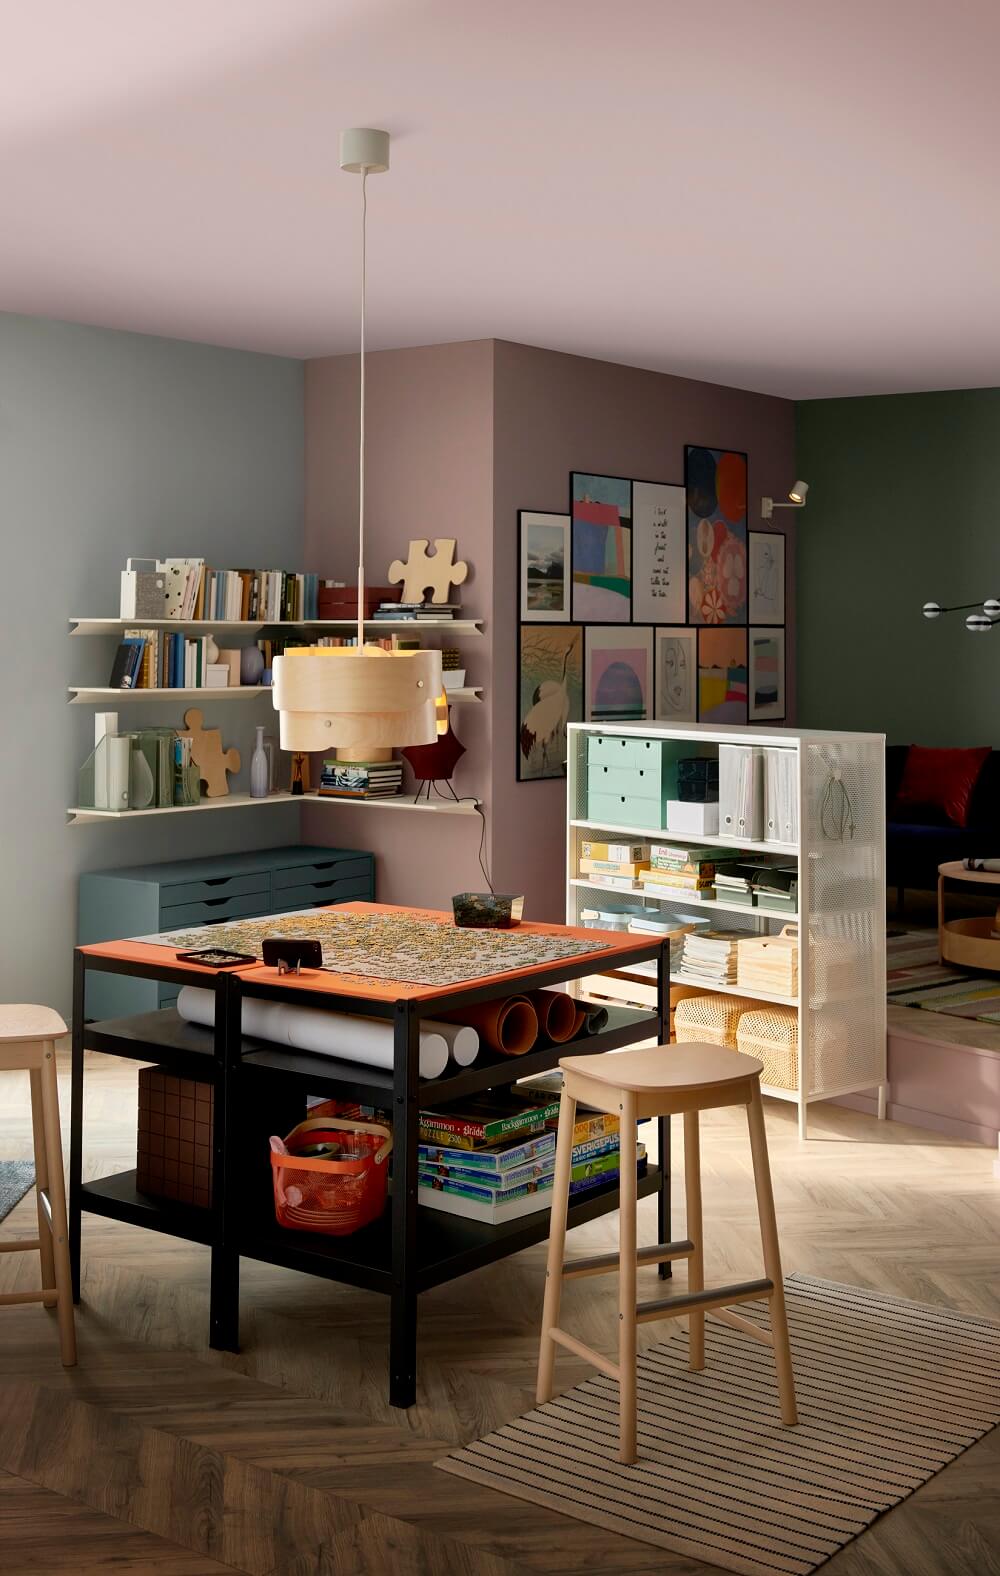 IKEA Spring Collection: Colorful Decor + Storage Solutions